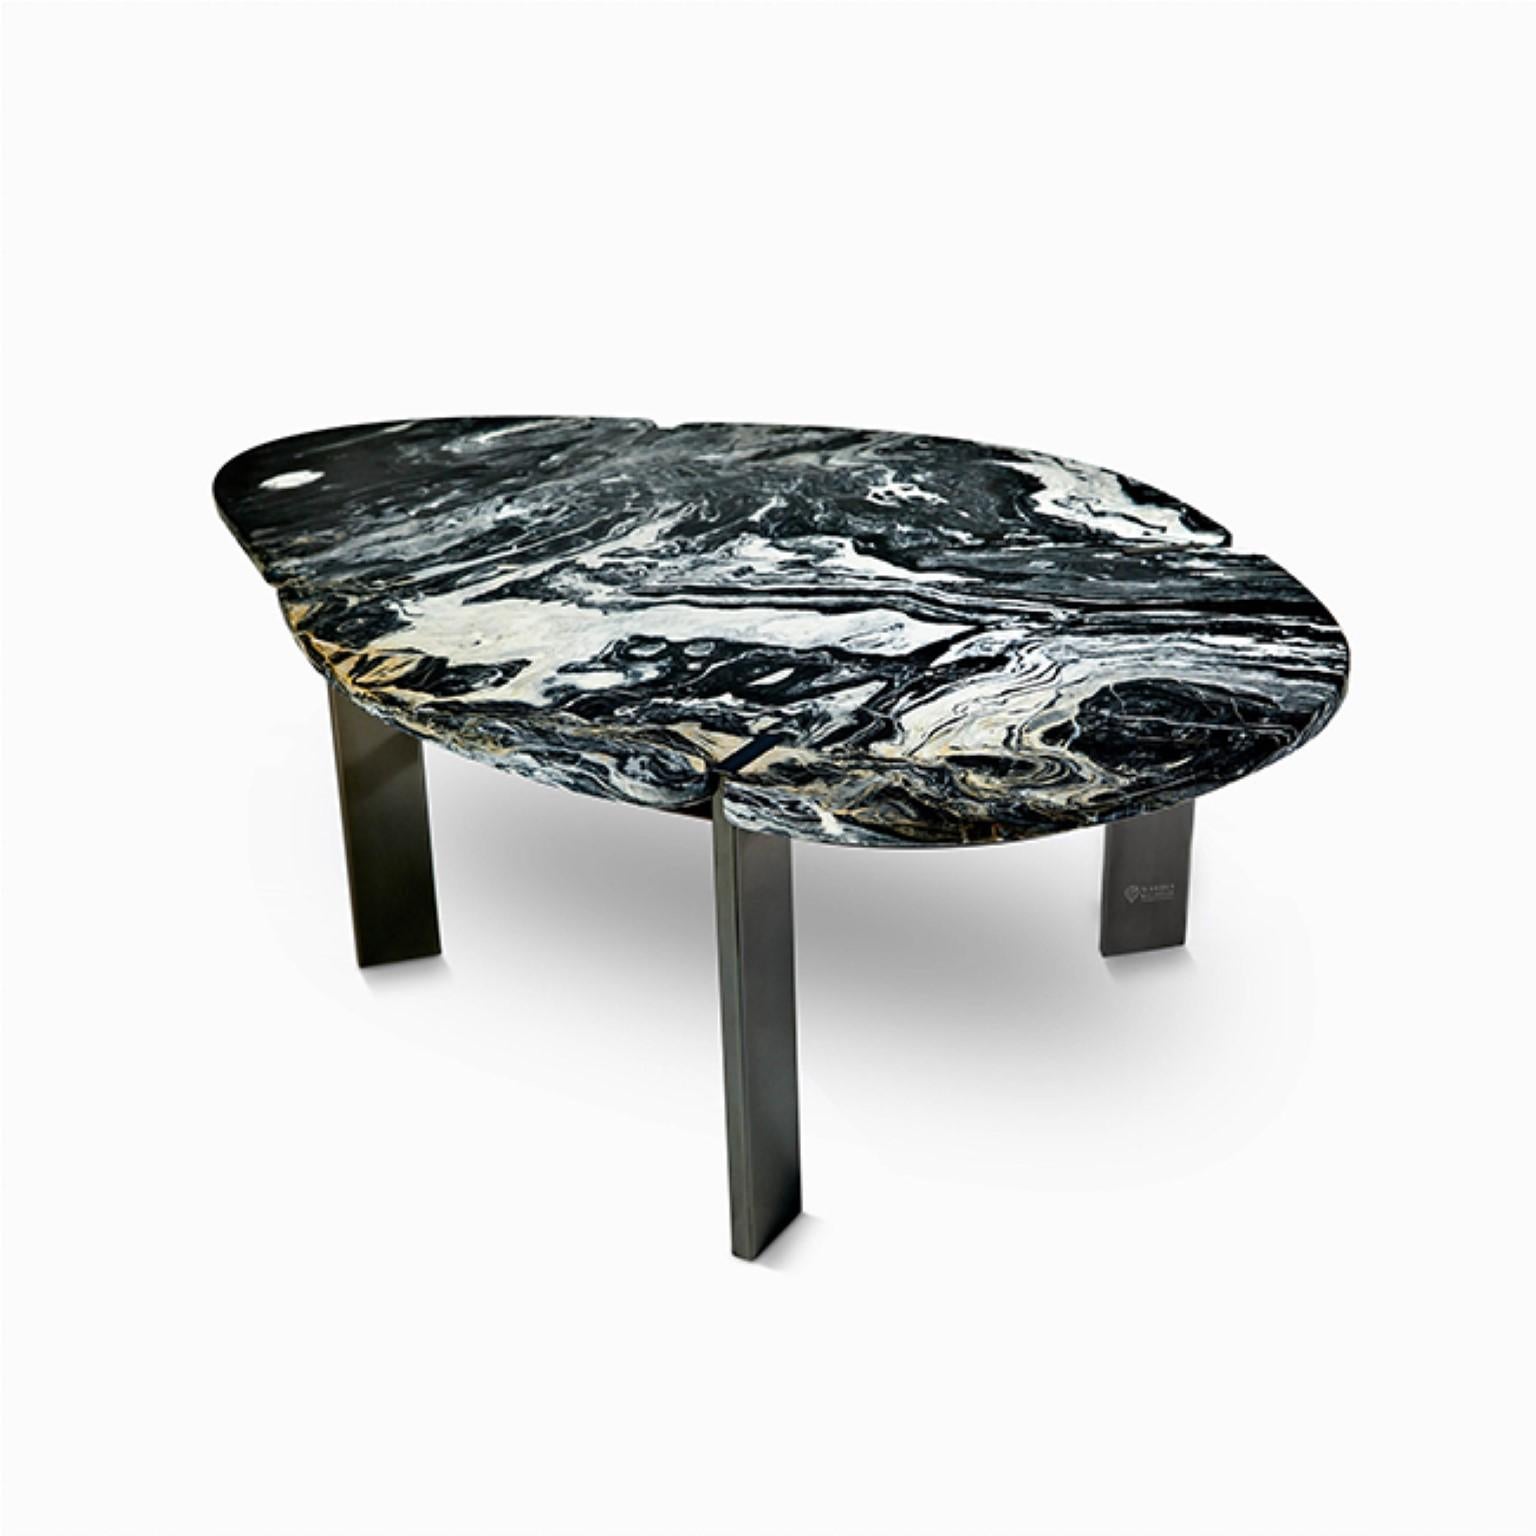 Blue Halys coffee table by Marble Balloon
Dimensions: W 130 x D 88 x H 39.5 cm
Materials: Steel, Marble

Taking its form from the famous Halys River, it consists of carrier legs made of titanium coating on stainless
metal and a marble